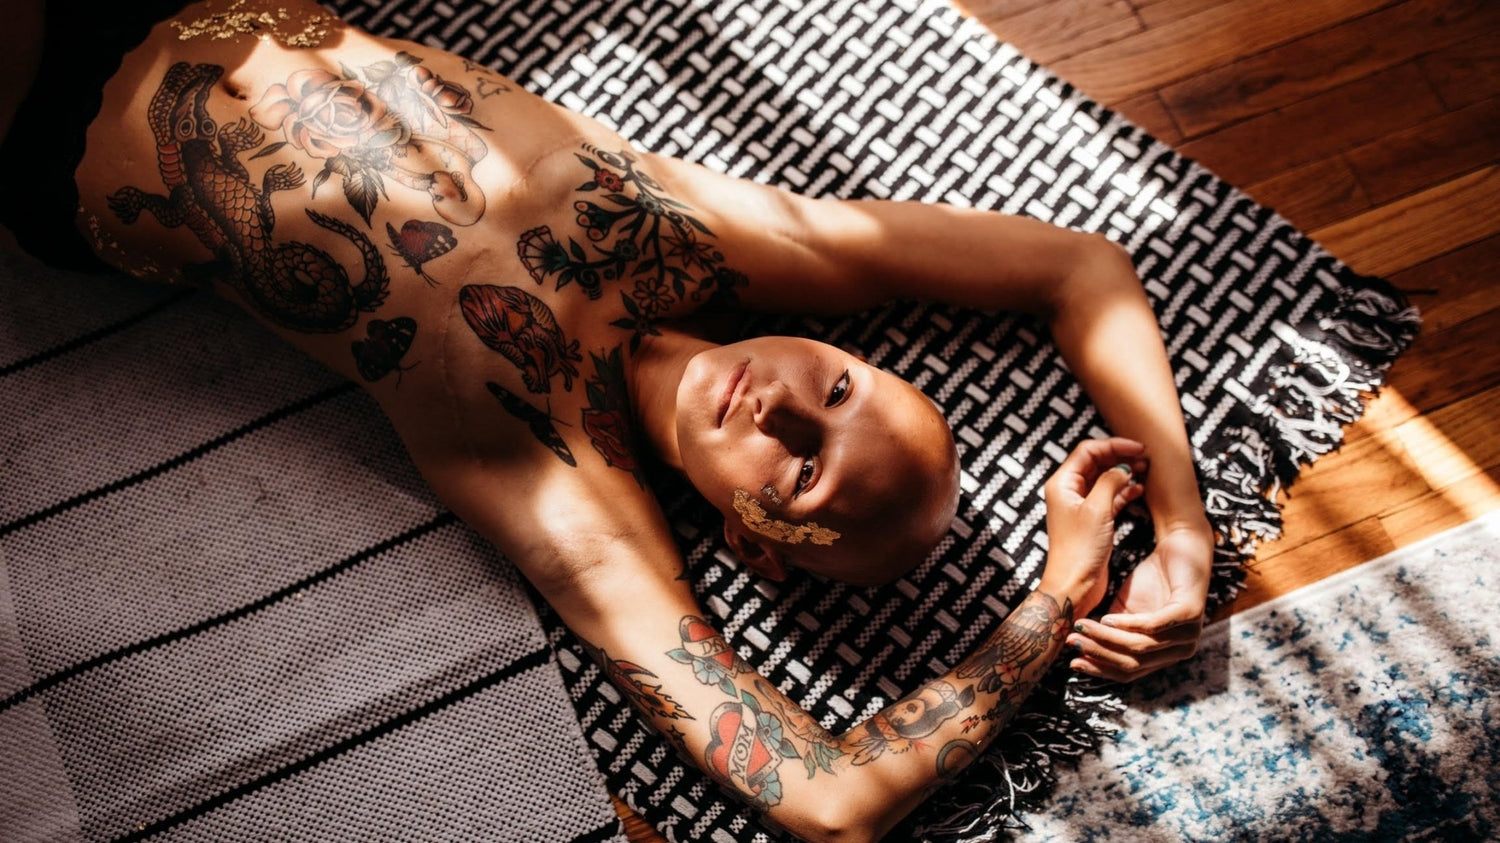 Tattoo Artists Cover Breast Cancer Survivors' Scars With Beautiful